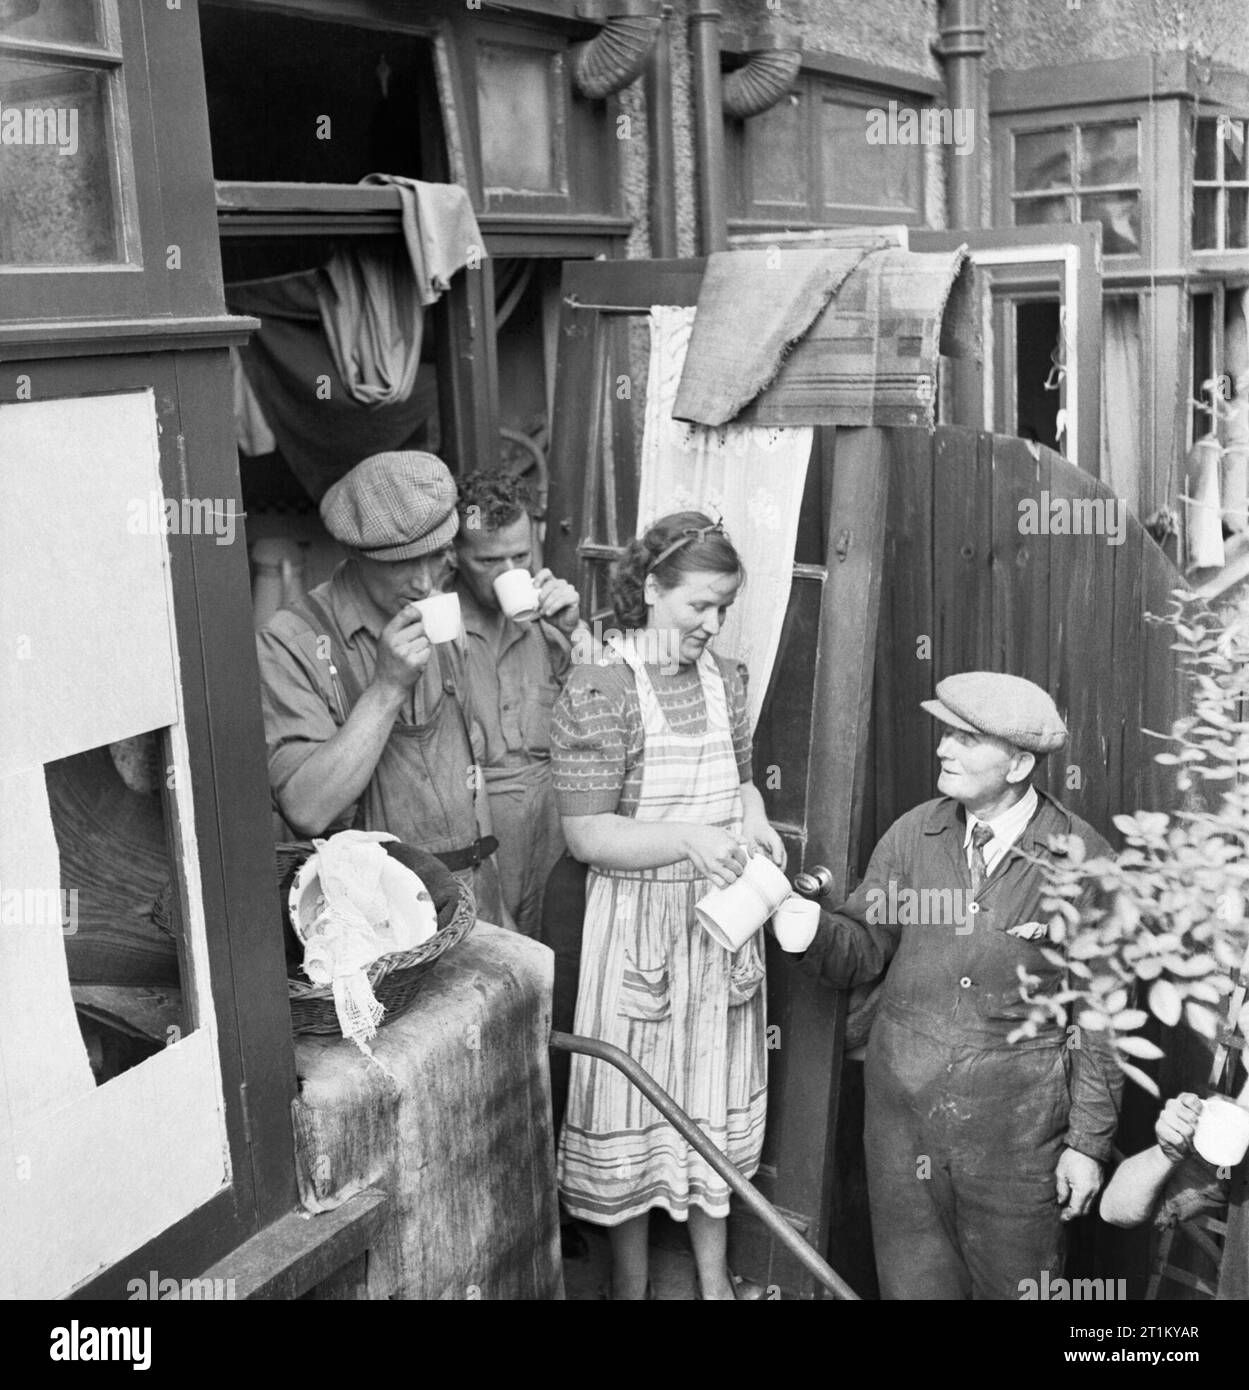 Builders are given cocoa as they make repairs to a house in London damaged by a V1 Flying Bomb in 1944. Mrs Calloghan gives cocoa to the team of builders who are repairing the damage to her London home following a V1 attack. The original caption states that she had just returned from evacuating her children to the country when the attack occurred and, although she has no windows and a damaged roof, she is not moving out of her home. The builders are part of the 'Blitz Repair Squad', a team of builders who have come to London from various parts of the country to help repair such damage. Stock Photo